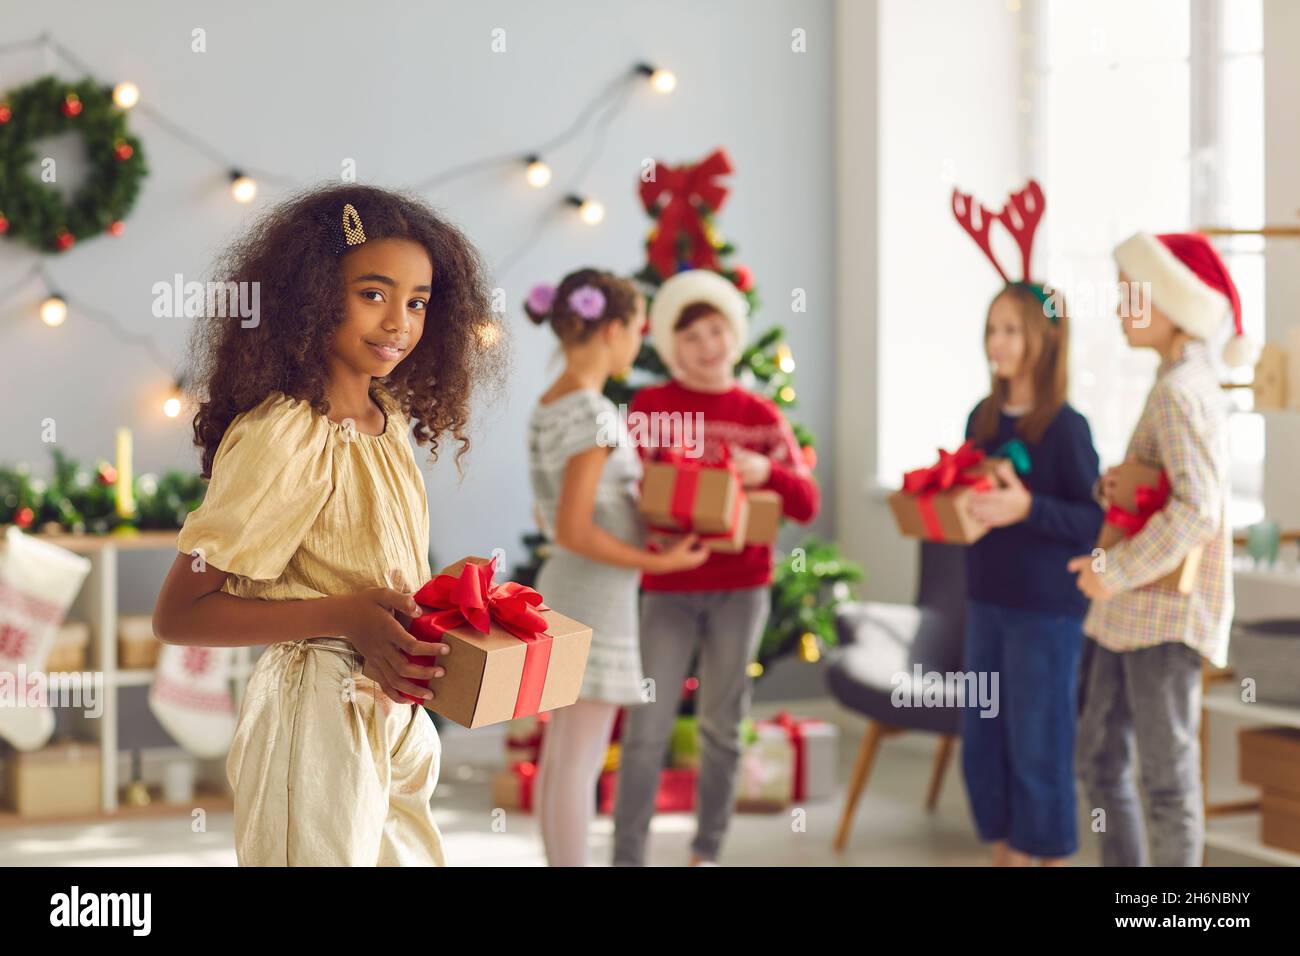 Smiling african american girl with a Christmas present in her hands stands in a bright room. Stock Photo